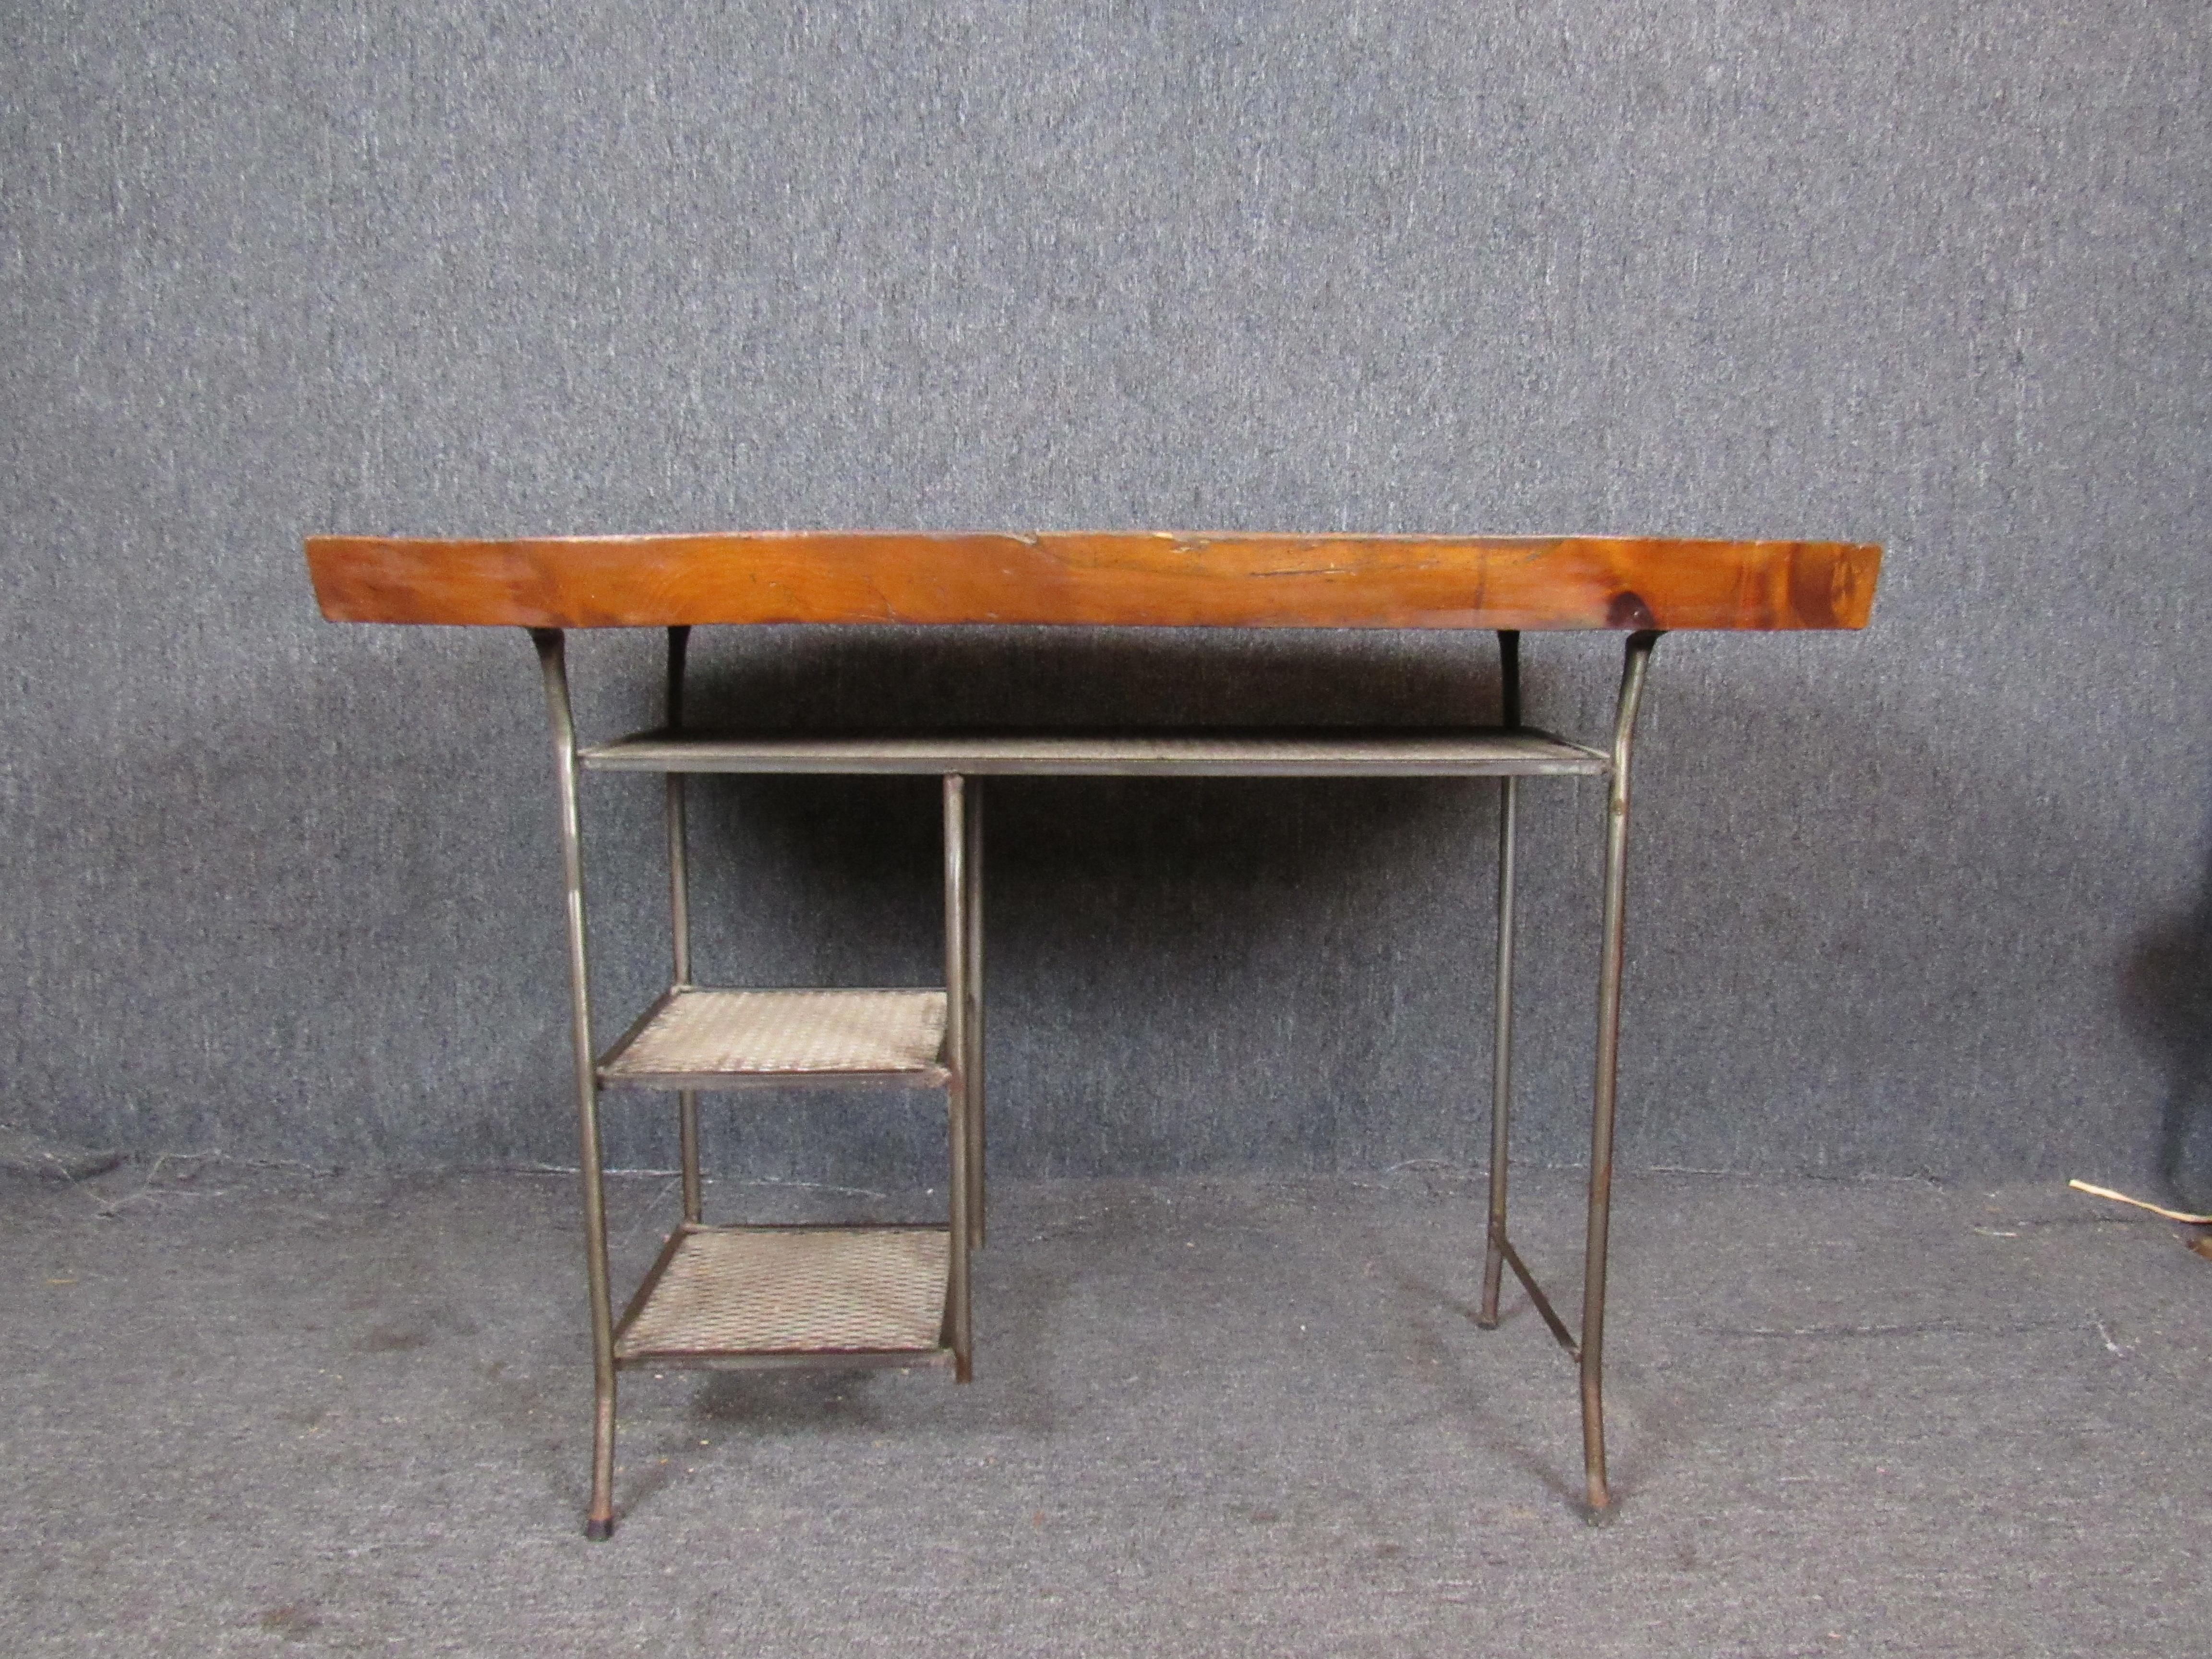 Absolutely fantastic writing desk, seamlessly blending nature and machine. A sturdy live edge slab desktop offers ample workspace for any project on hand. An industrial iron base features three shelves, lending functionality and style. Please